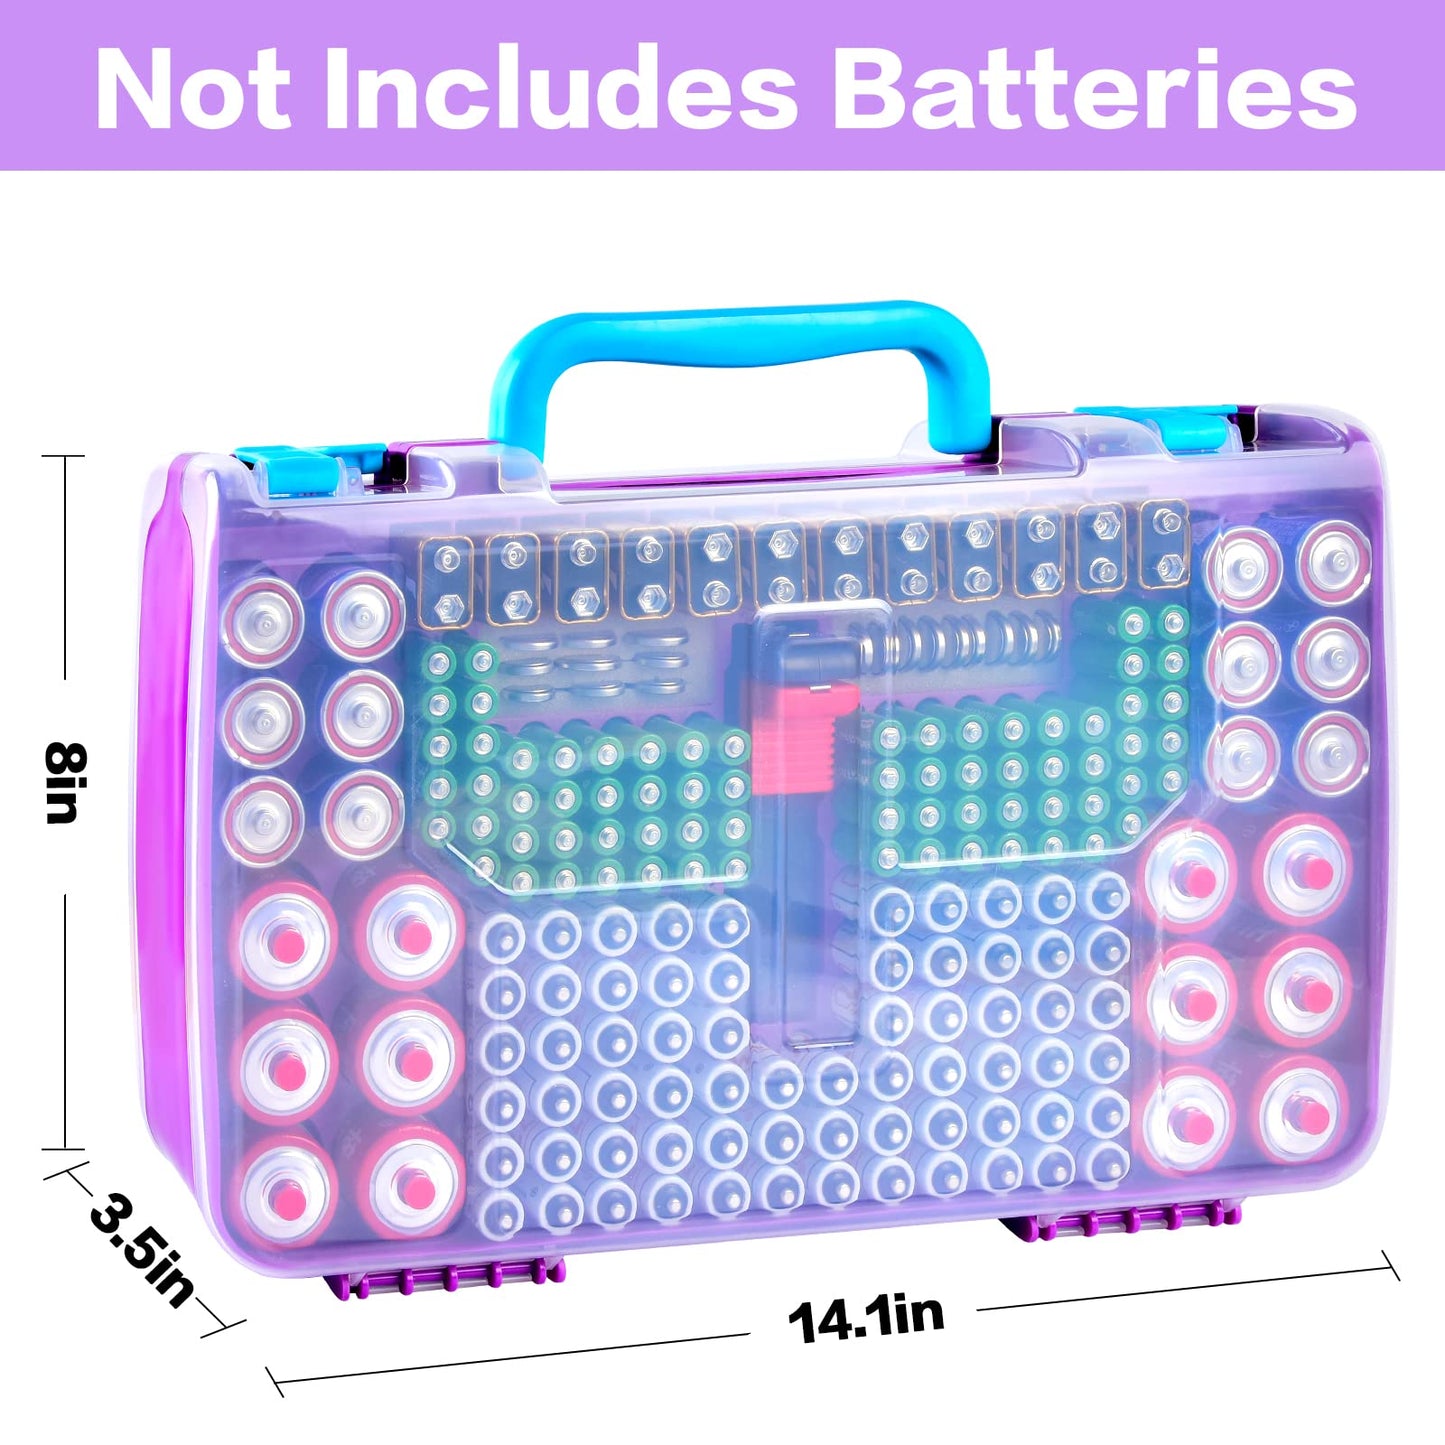 Battery Organizer Storage Case with Tester, Double-Sided Batteries Box Holder Fits for 269 AA AAA AAAA 3A 4A 9V C D Lithium 23A 4LR44 CR123A CR1632 CR2032, Battery Garage Container Keeper- Purple